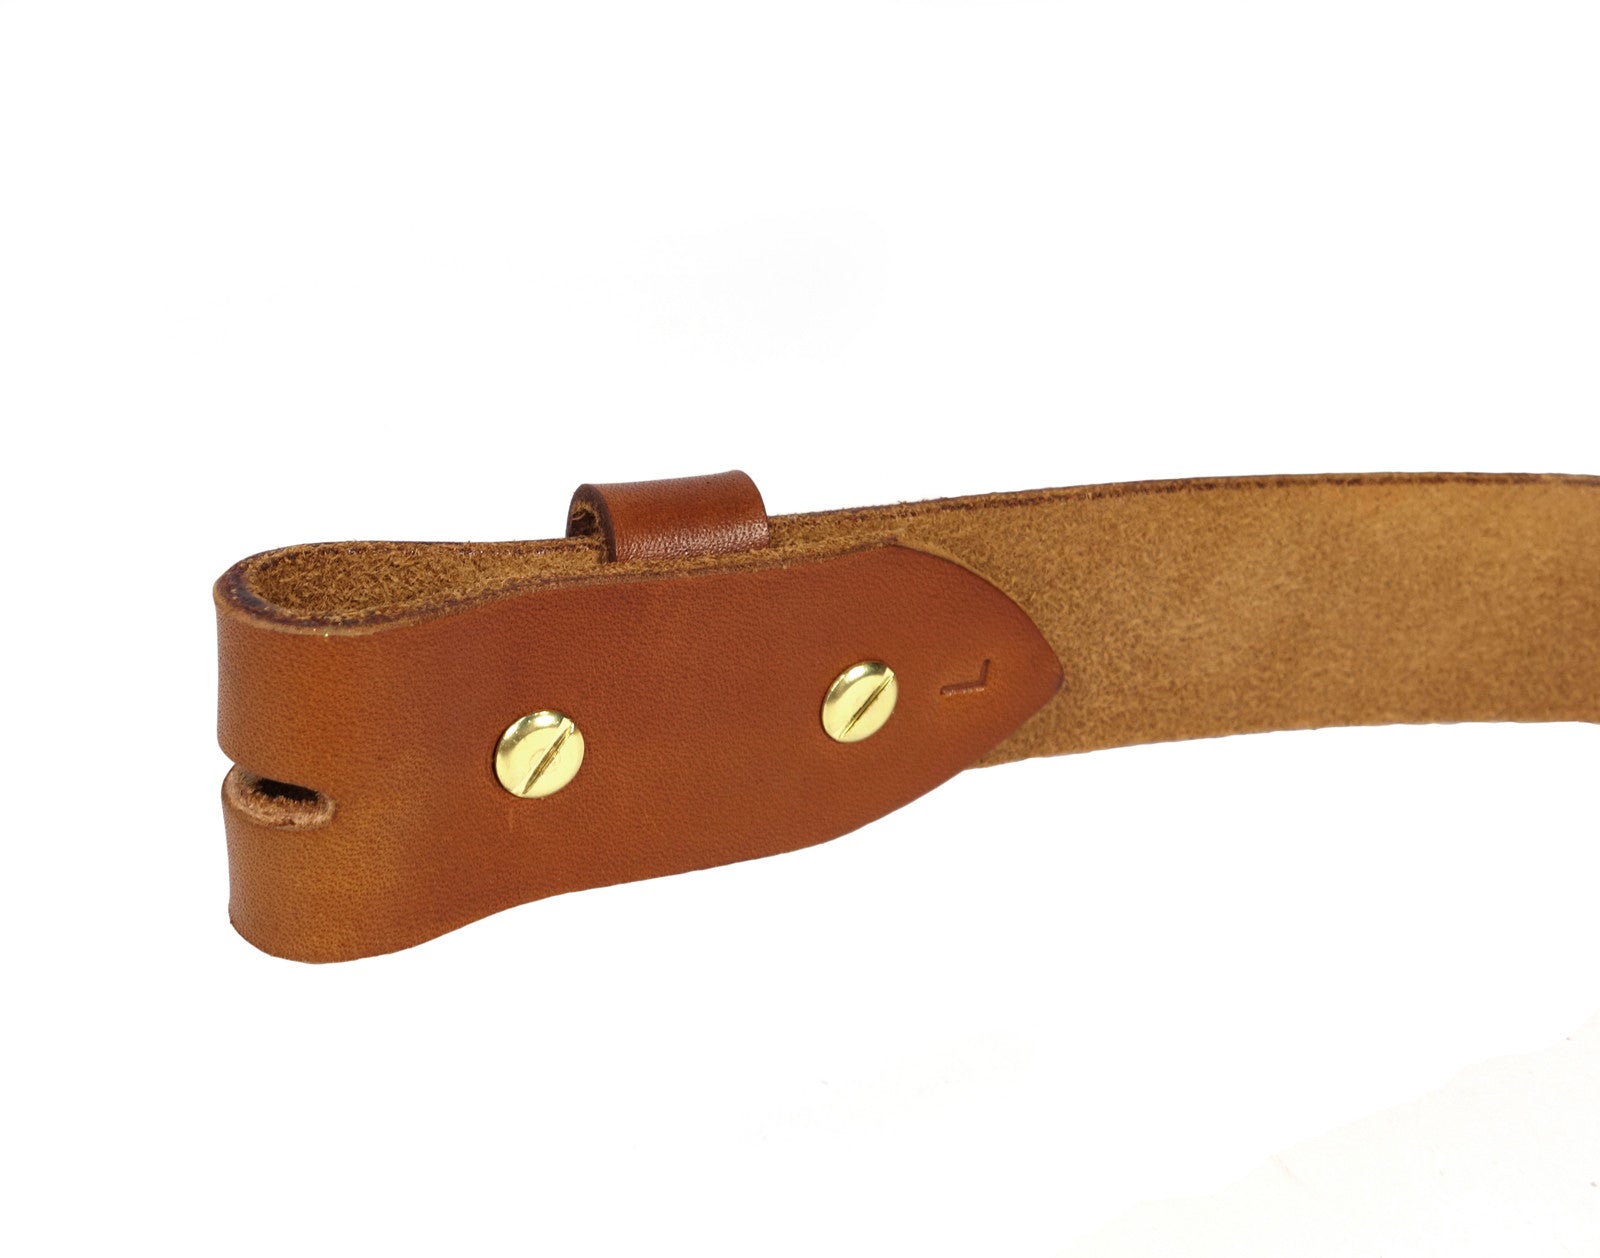 Leather belt, solid brass buckle, handmade, handcrafted, made in the usa, made in america, veg tan leather, built to last, always better with time, red clouds collective